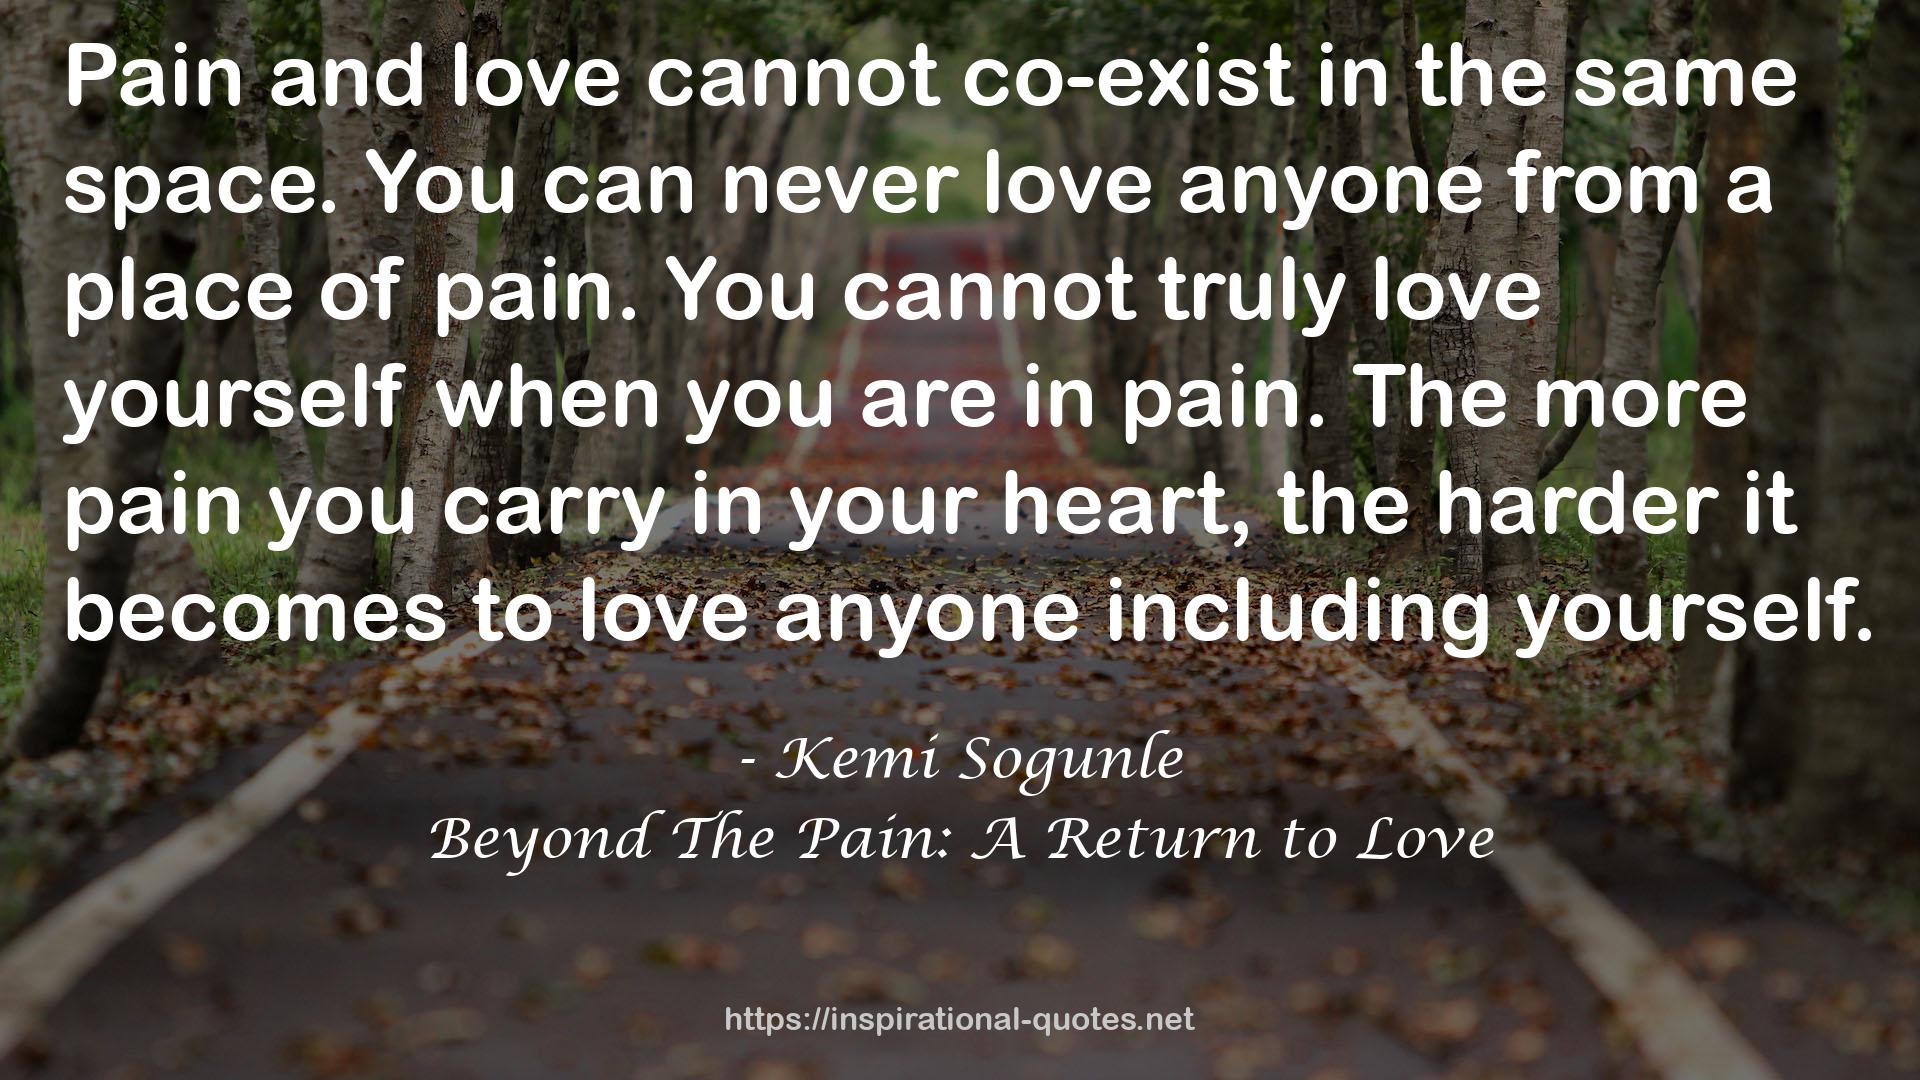 Beyond The Pain: A Return to Love QUOTES